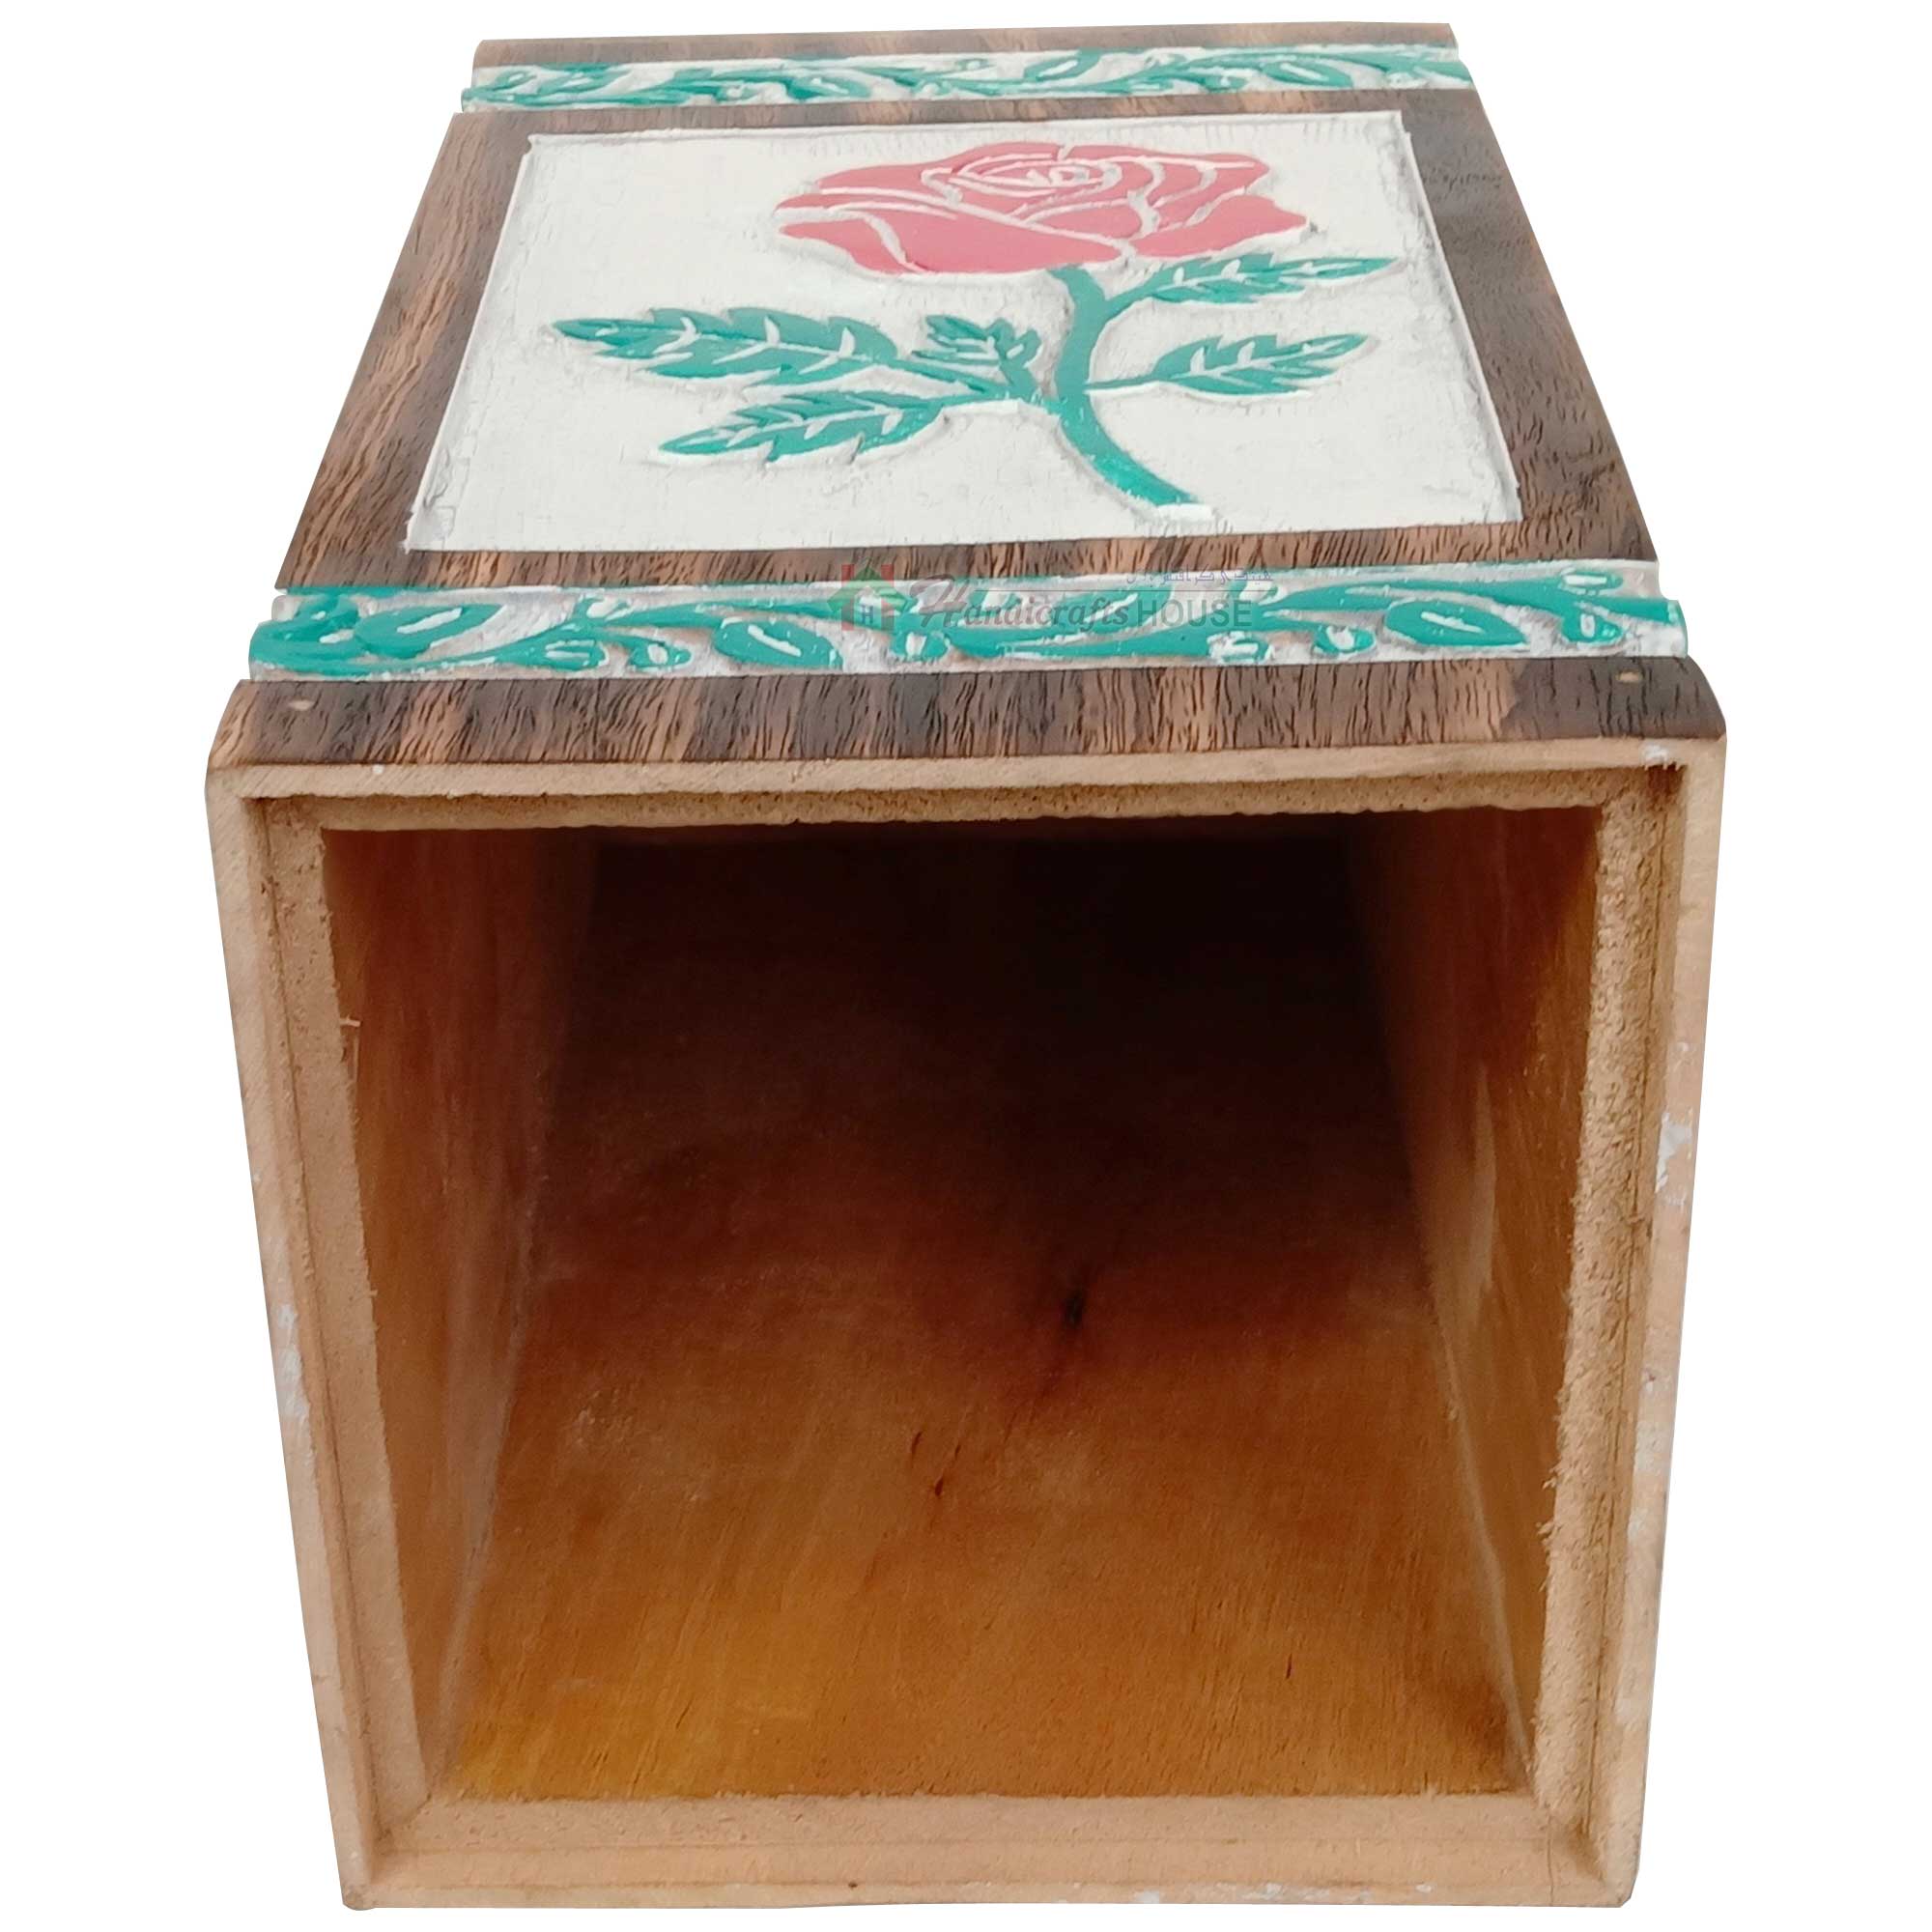 Hands Engraving Flower Urns, Wooden Urn for Pet Ashes -Solid wood Memorial Large Box in White, Green and Red Color